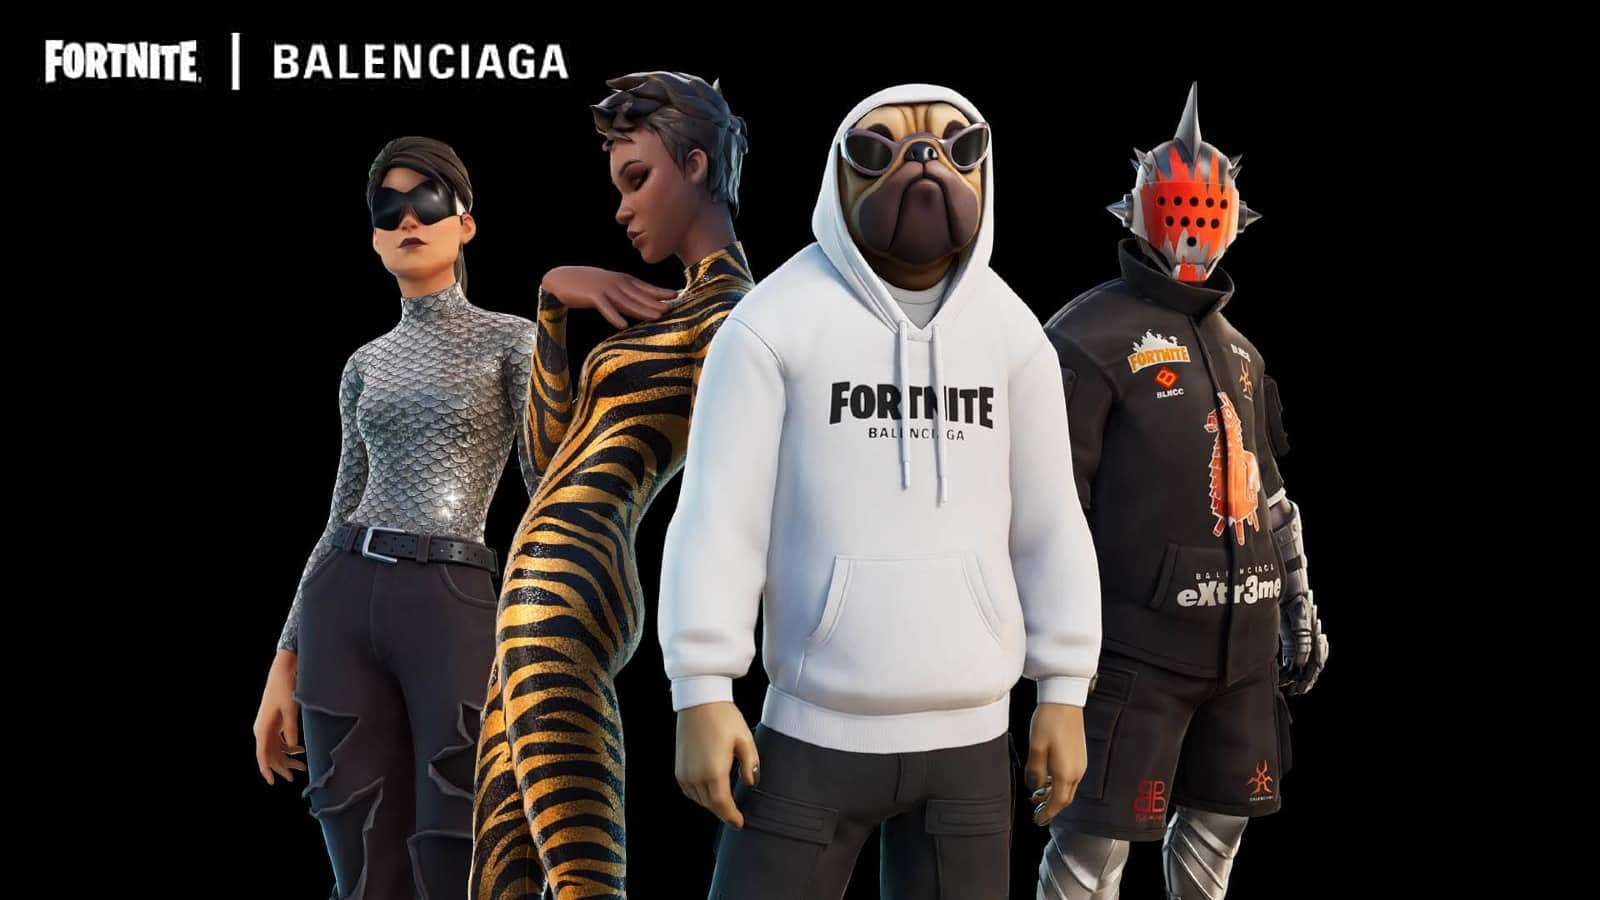 Lave om Rejse Minearbejder How to unlock Fortnite Balenciaga cosmetics: Outfits, back blings, pickaxes  & more - Dexerto